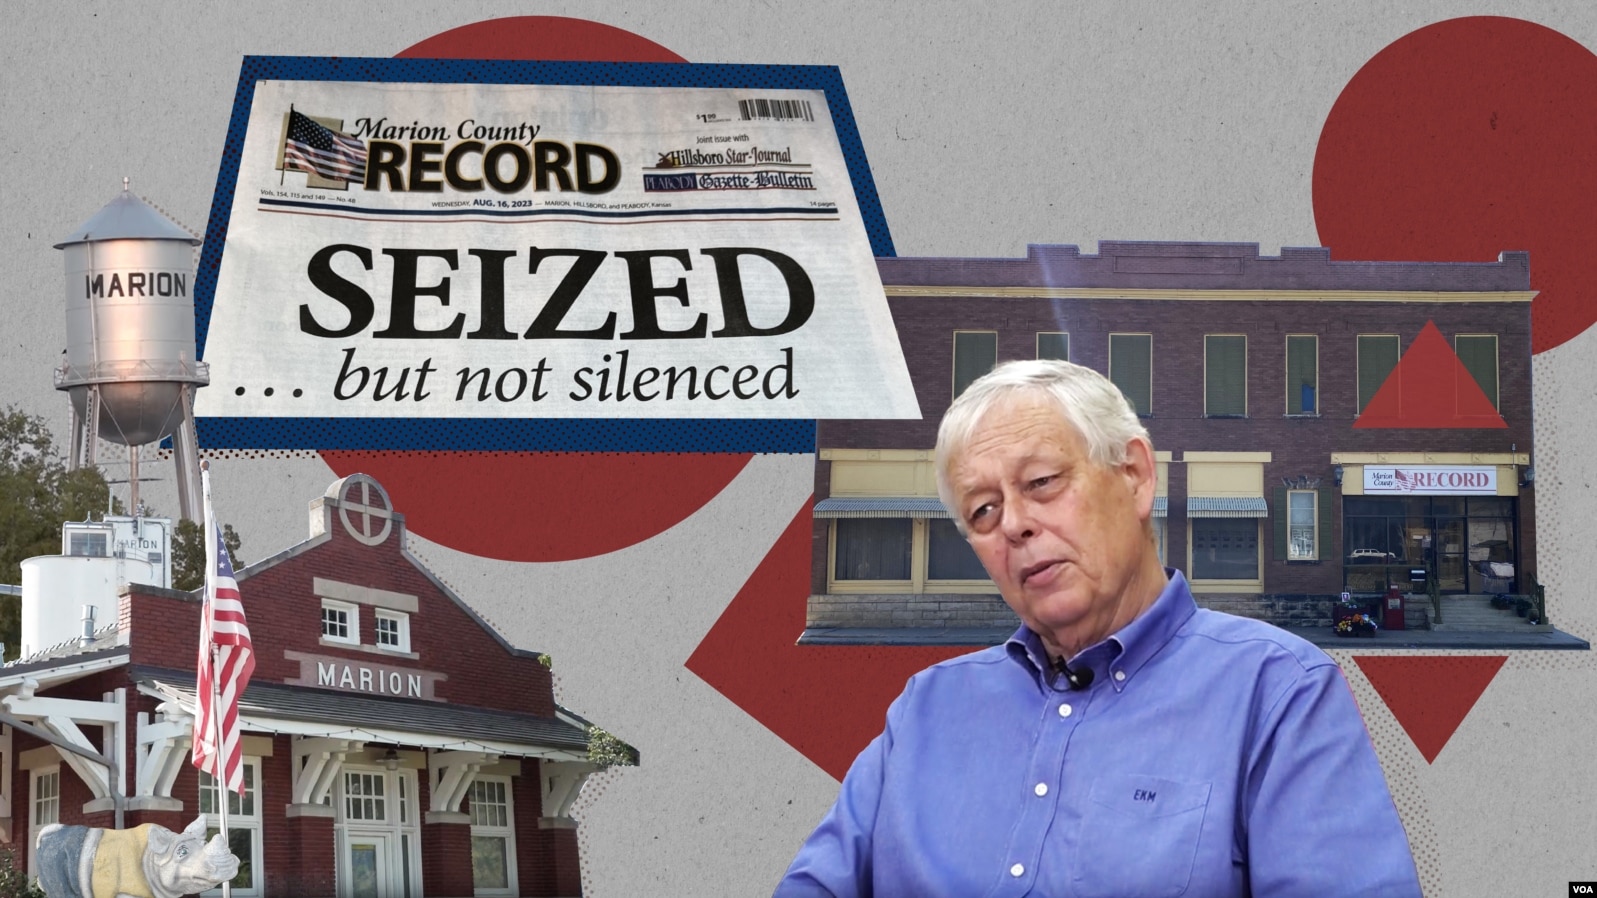 The Marion County Record with a headline of "Seized but Not Silenced," surrounded by pictures of Marion and an older man in a work shirt